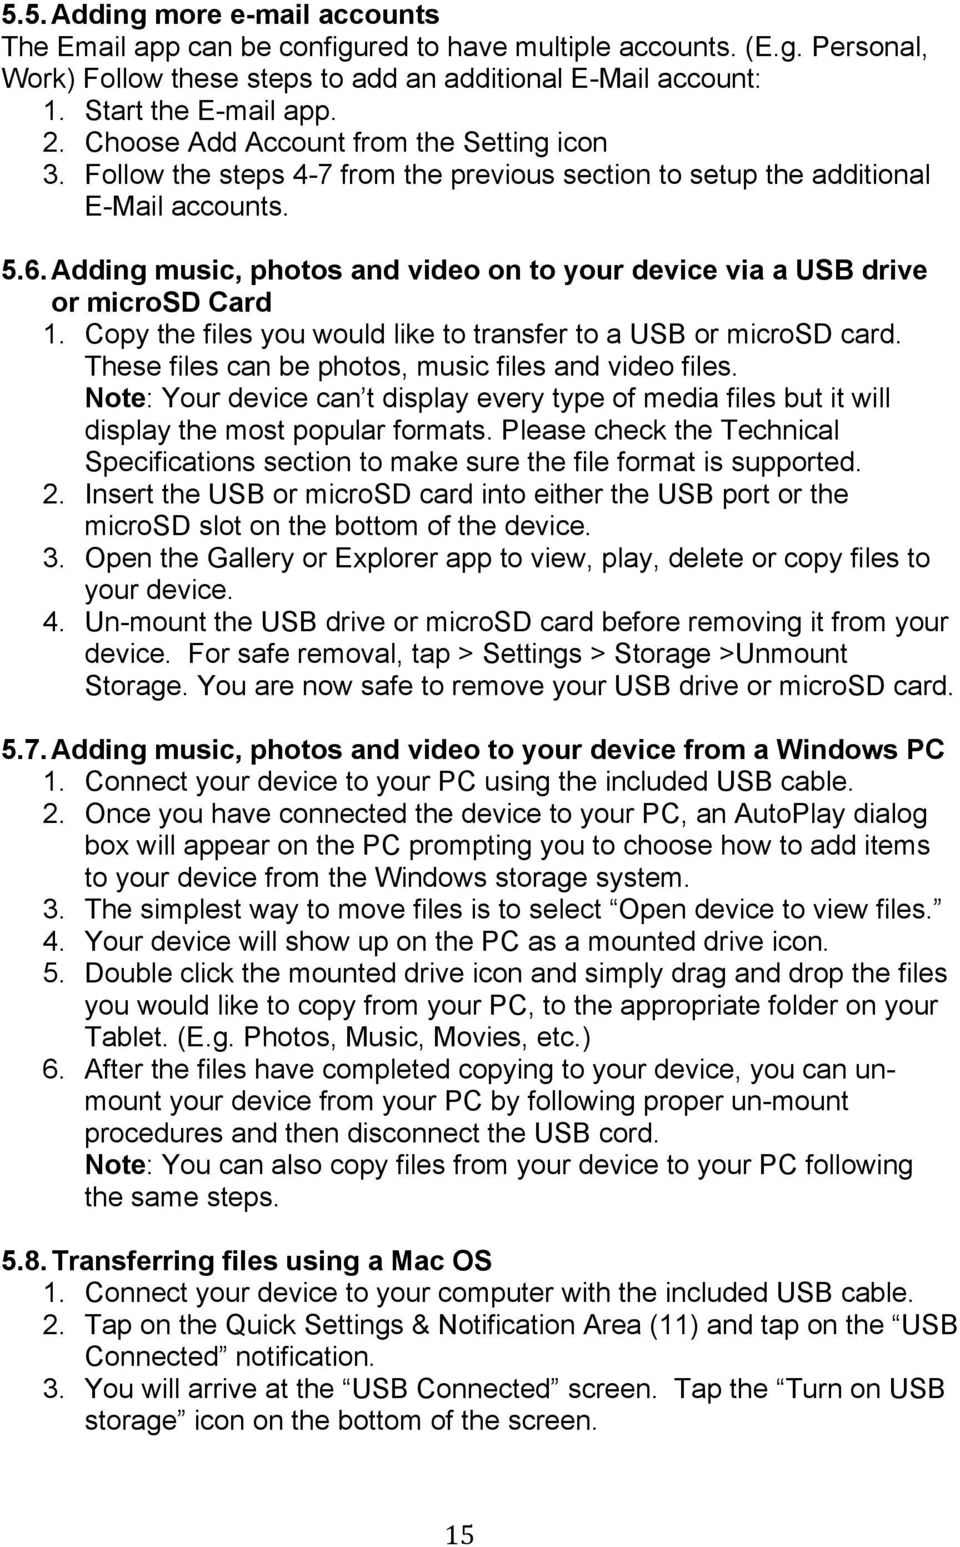 Adding music, photos and video on to your device via a USB drive or microsd Card 1. Copy the files you would like to transfer to a USB or microsd card.